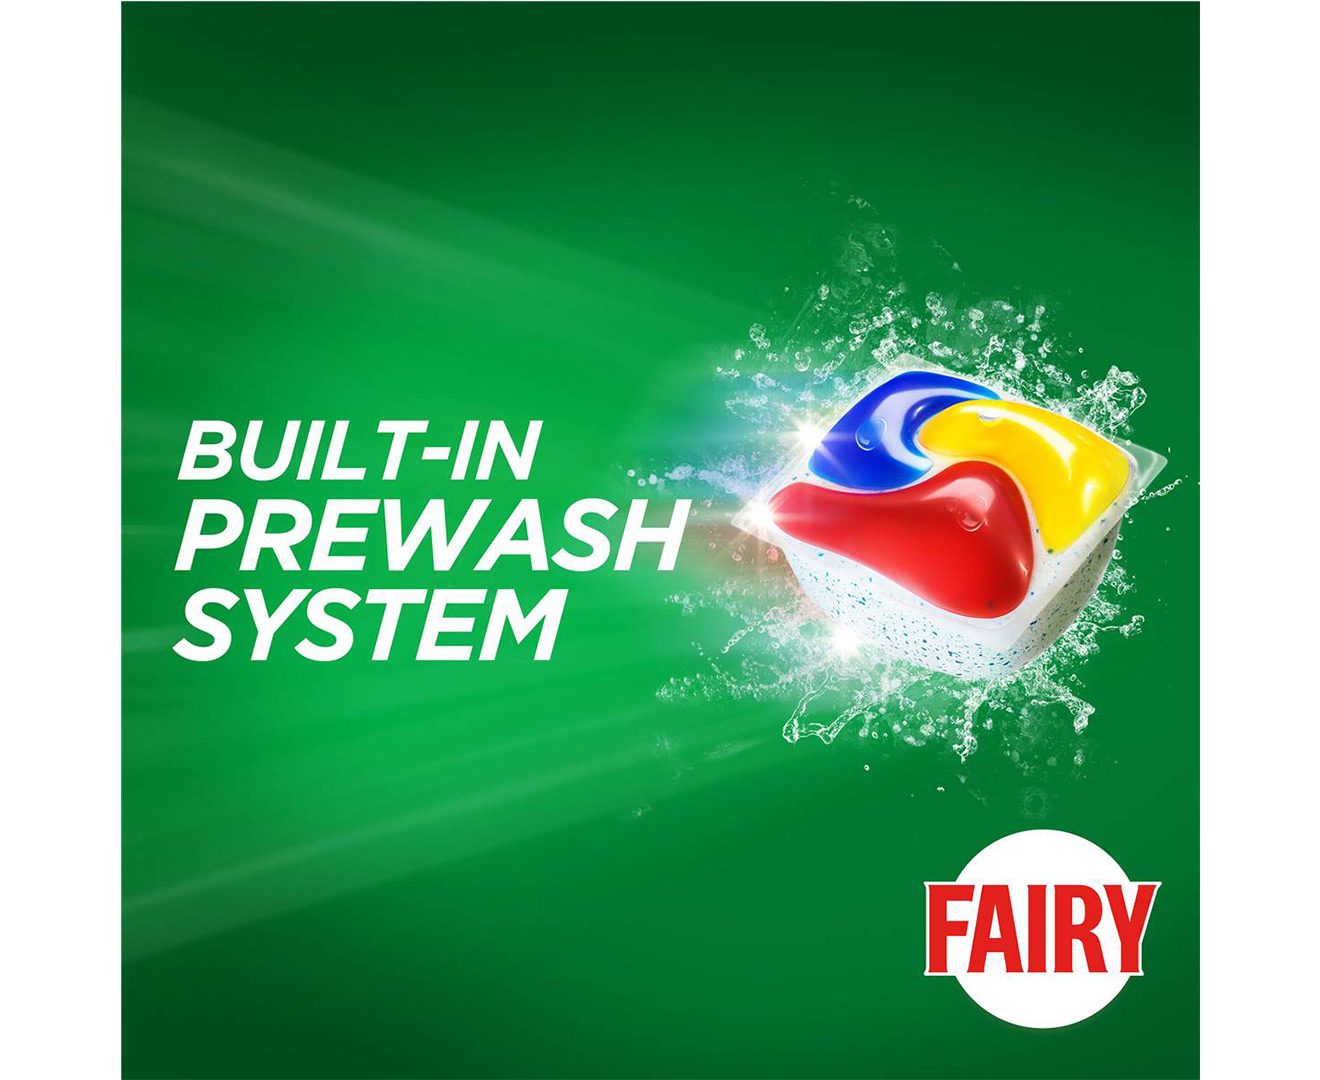 Fairy Platinum Plus Expert All In One Dishwasher Tablets 42 Pack